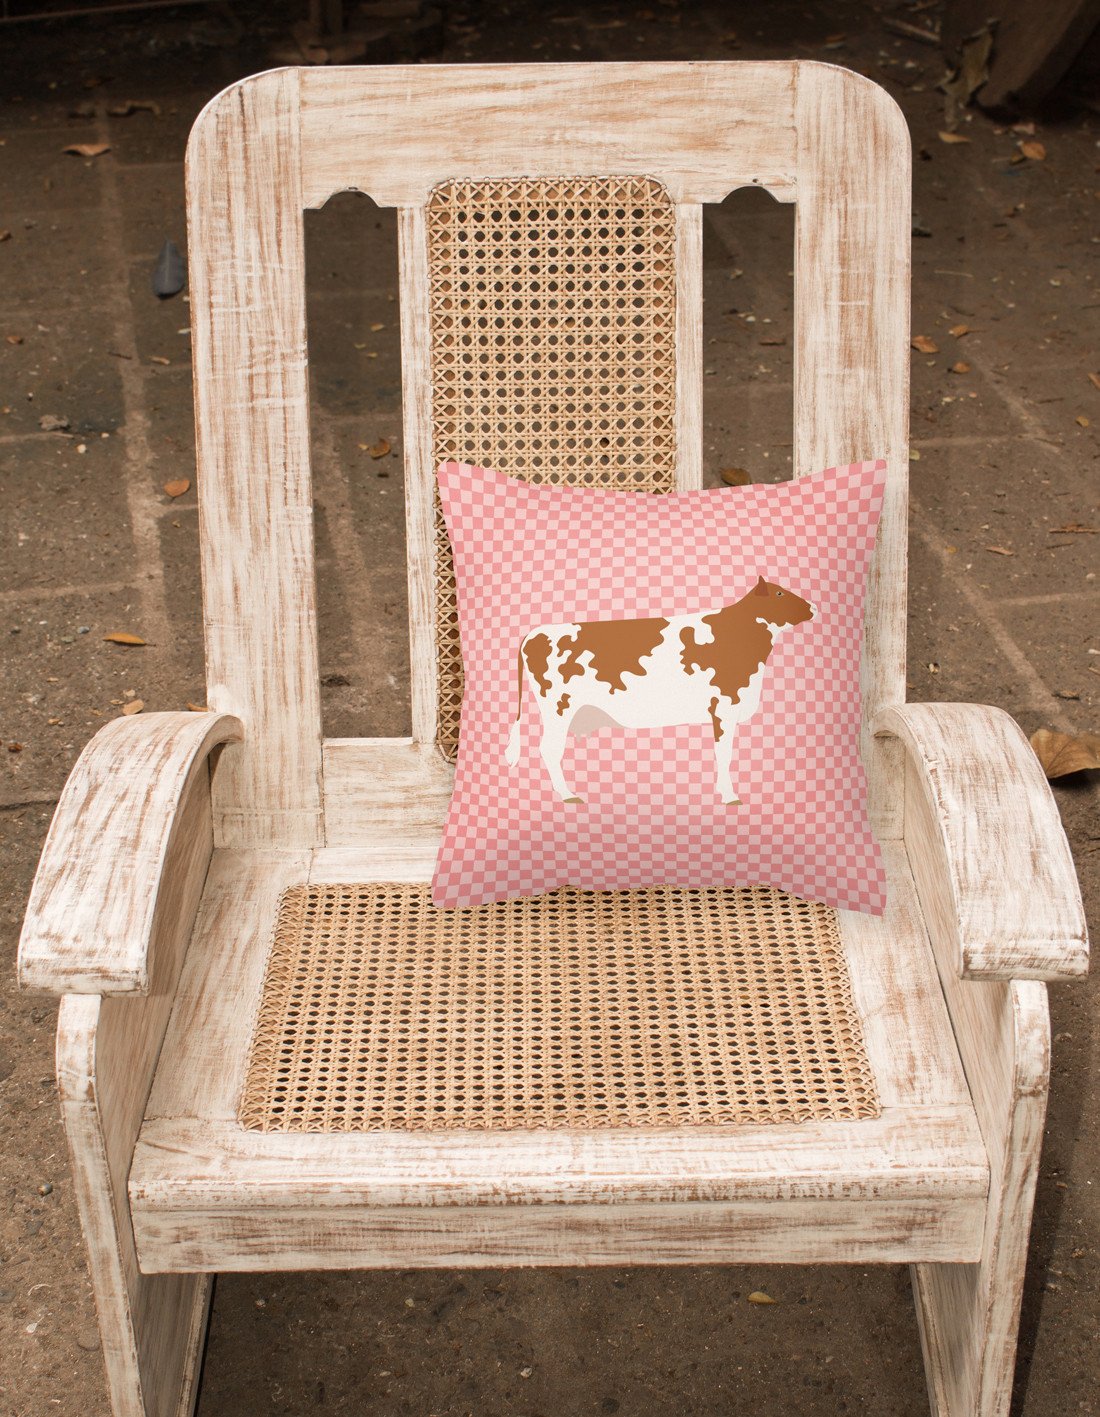 Ayrshire Cow Pink Check Fabric Decorative Pillow BB7827PW1818 by Caroline's Treasures